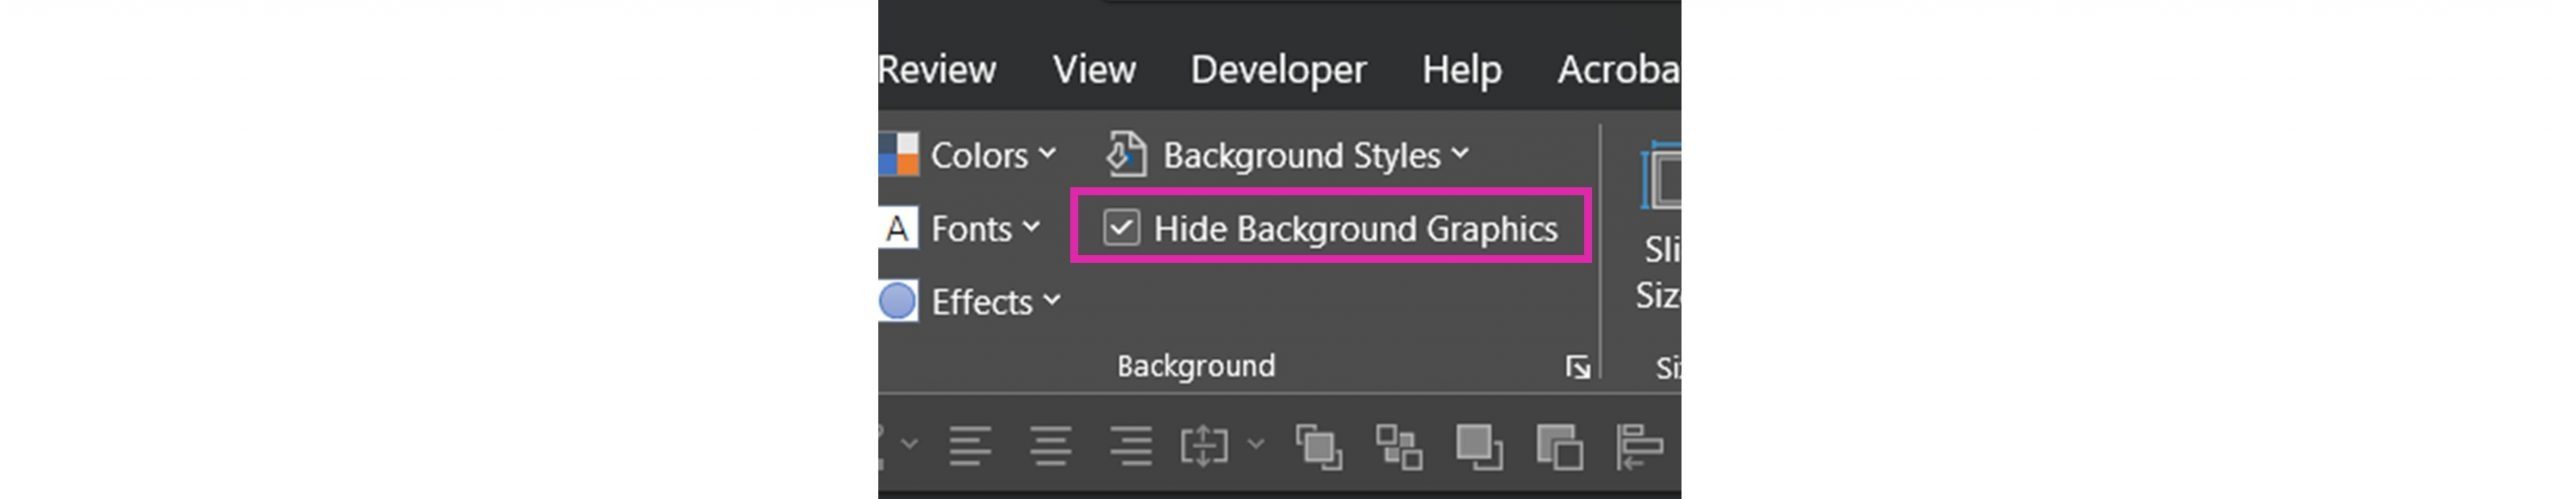 screenshot of PowerPoint ribbon with Hide Background Graphics check box highlighted